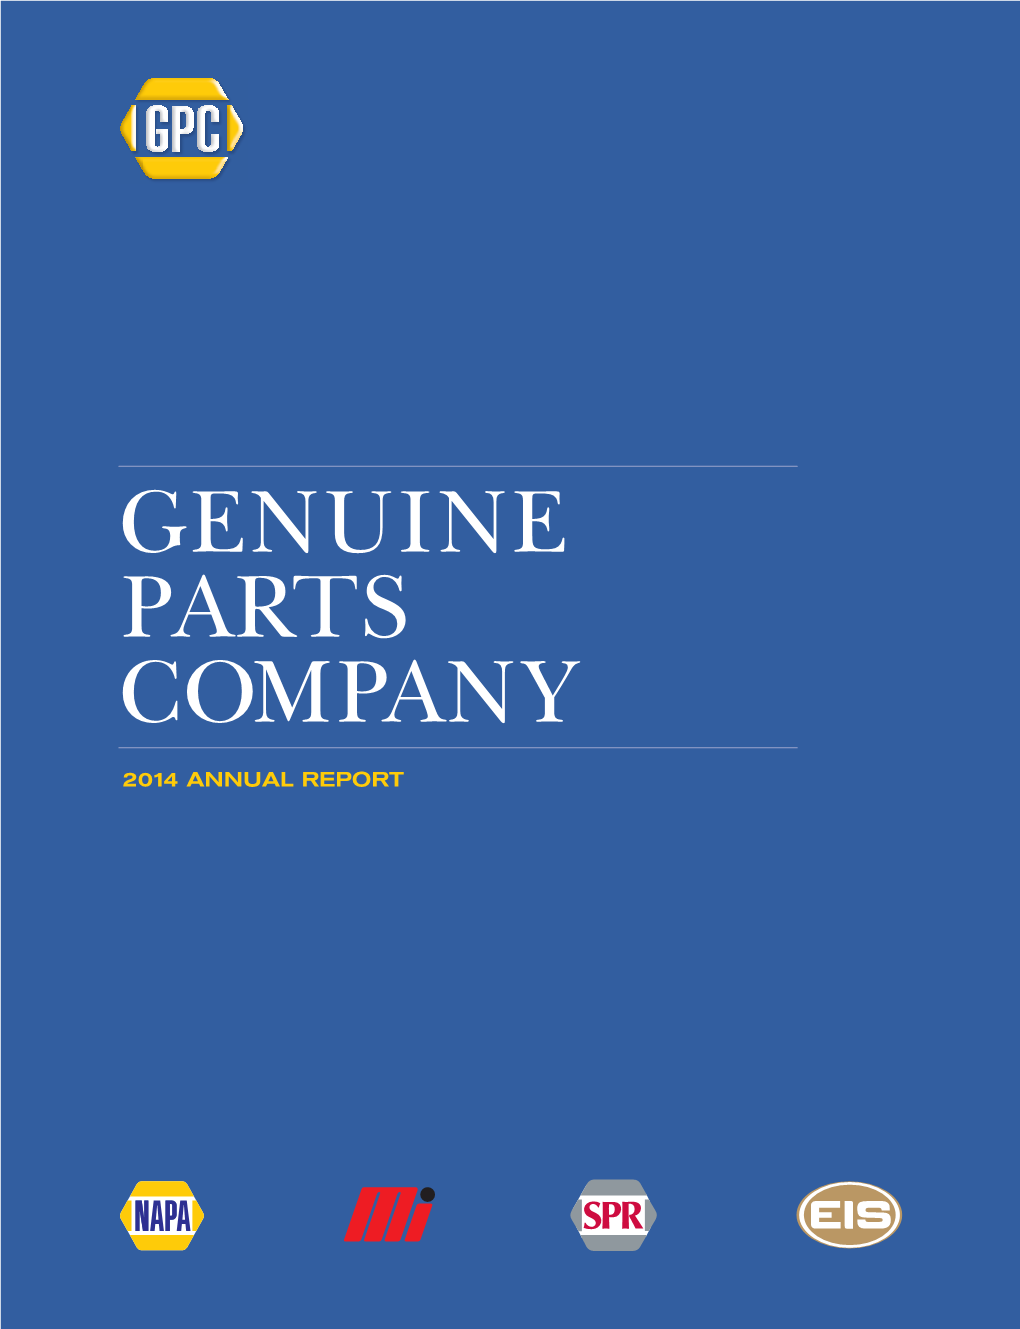 Genuine Parts Company Financial Highlights